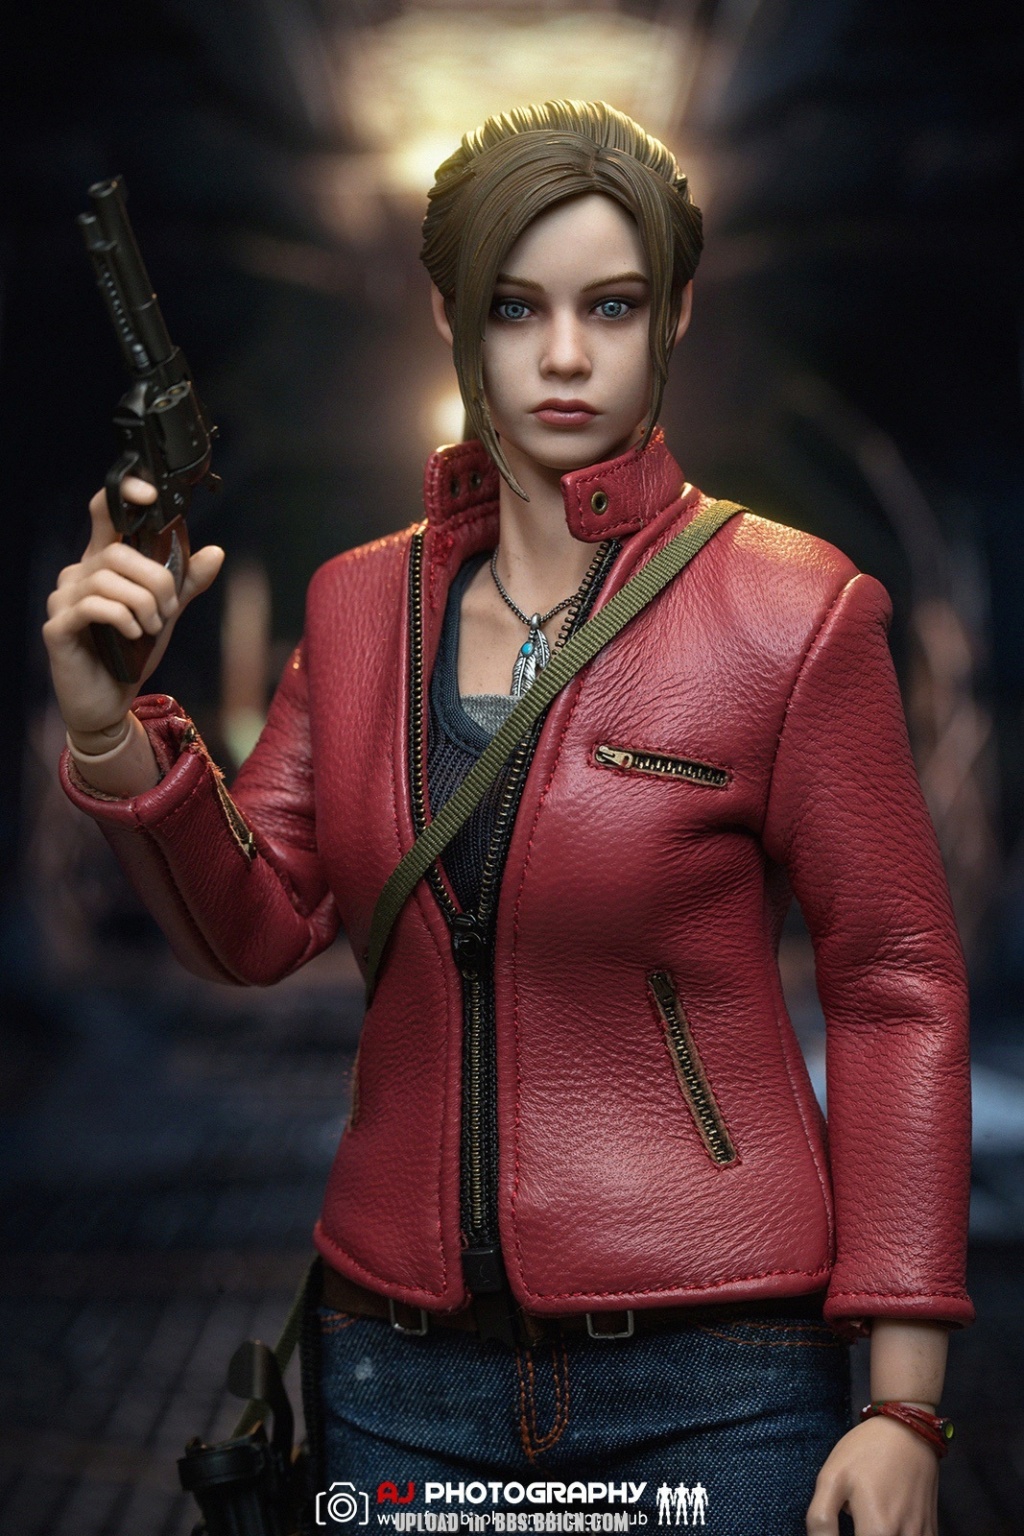 ResidentEvil2 - NEW PRODUCT: NAUTS & DAMTOYS: DMS031 1/6 Scale Resident Evil 2 - Claire Redfield (reissue?) 7a98a010